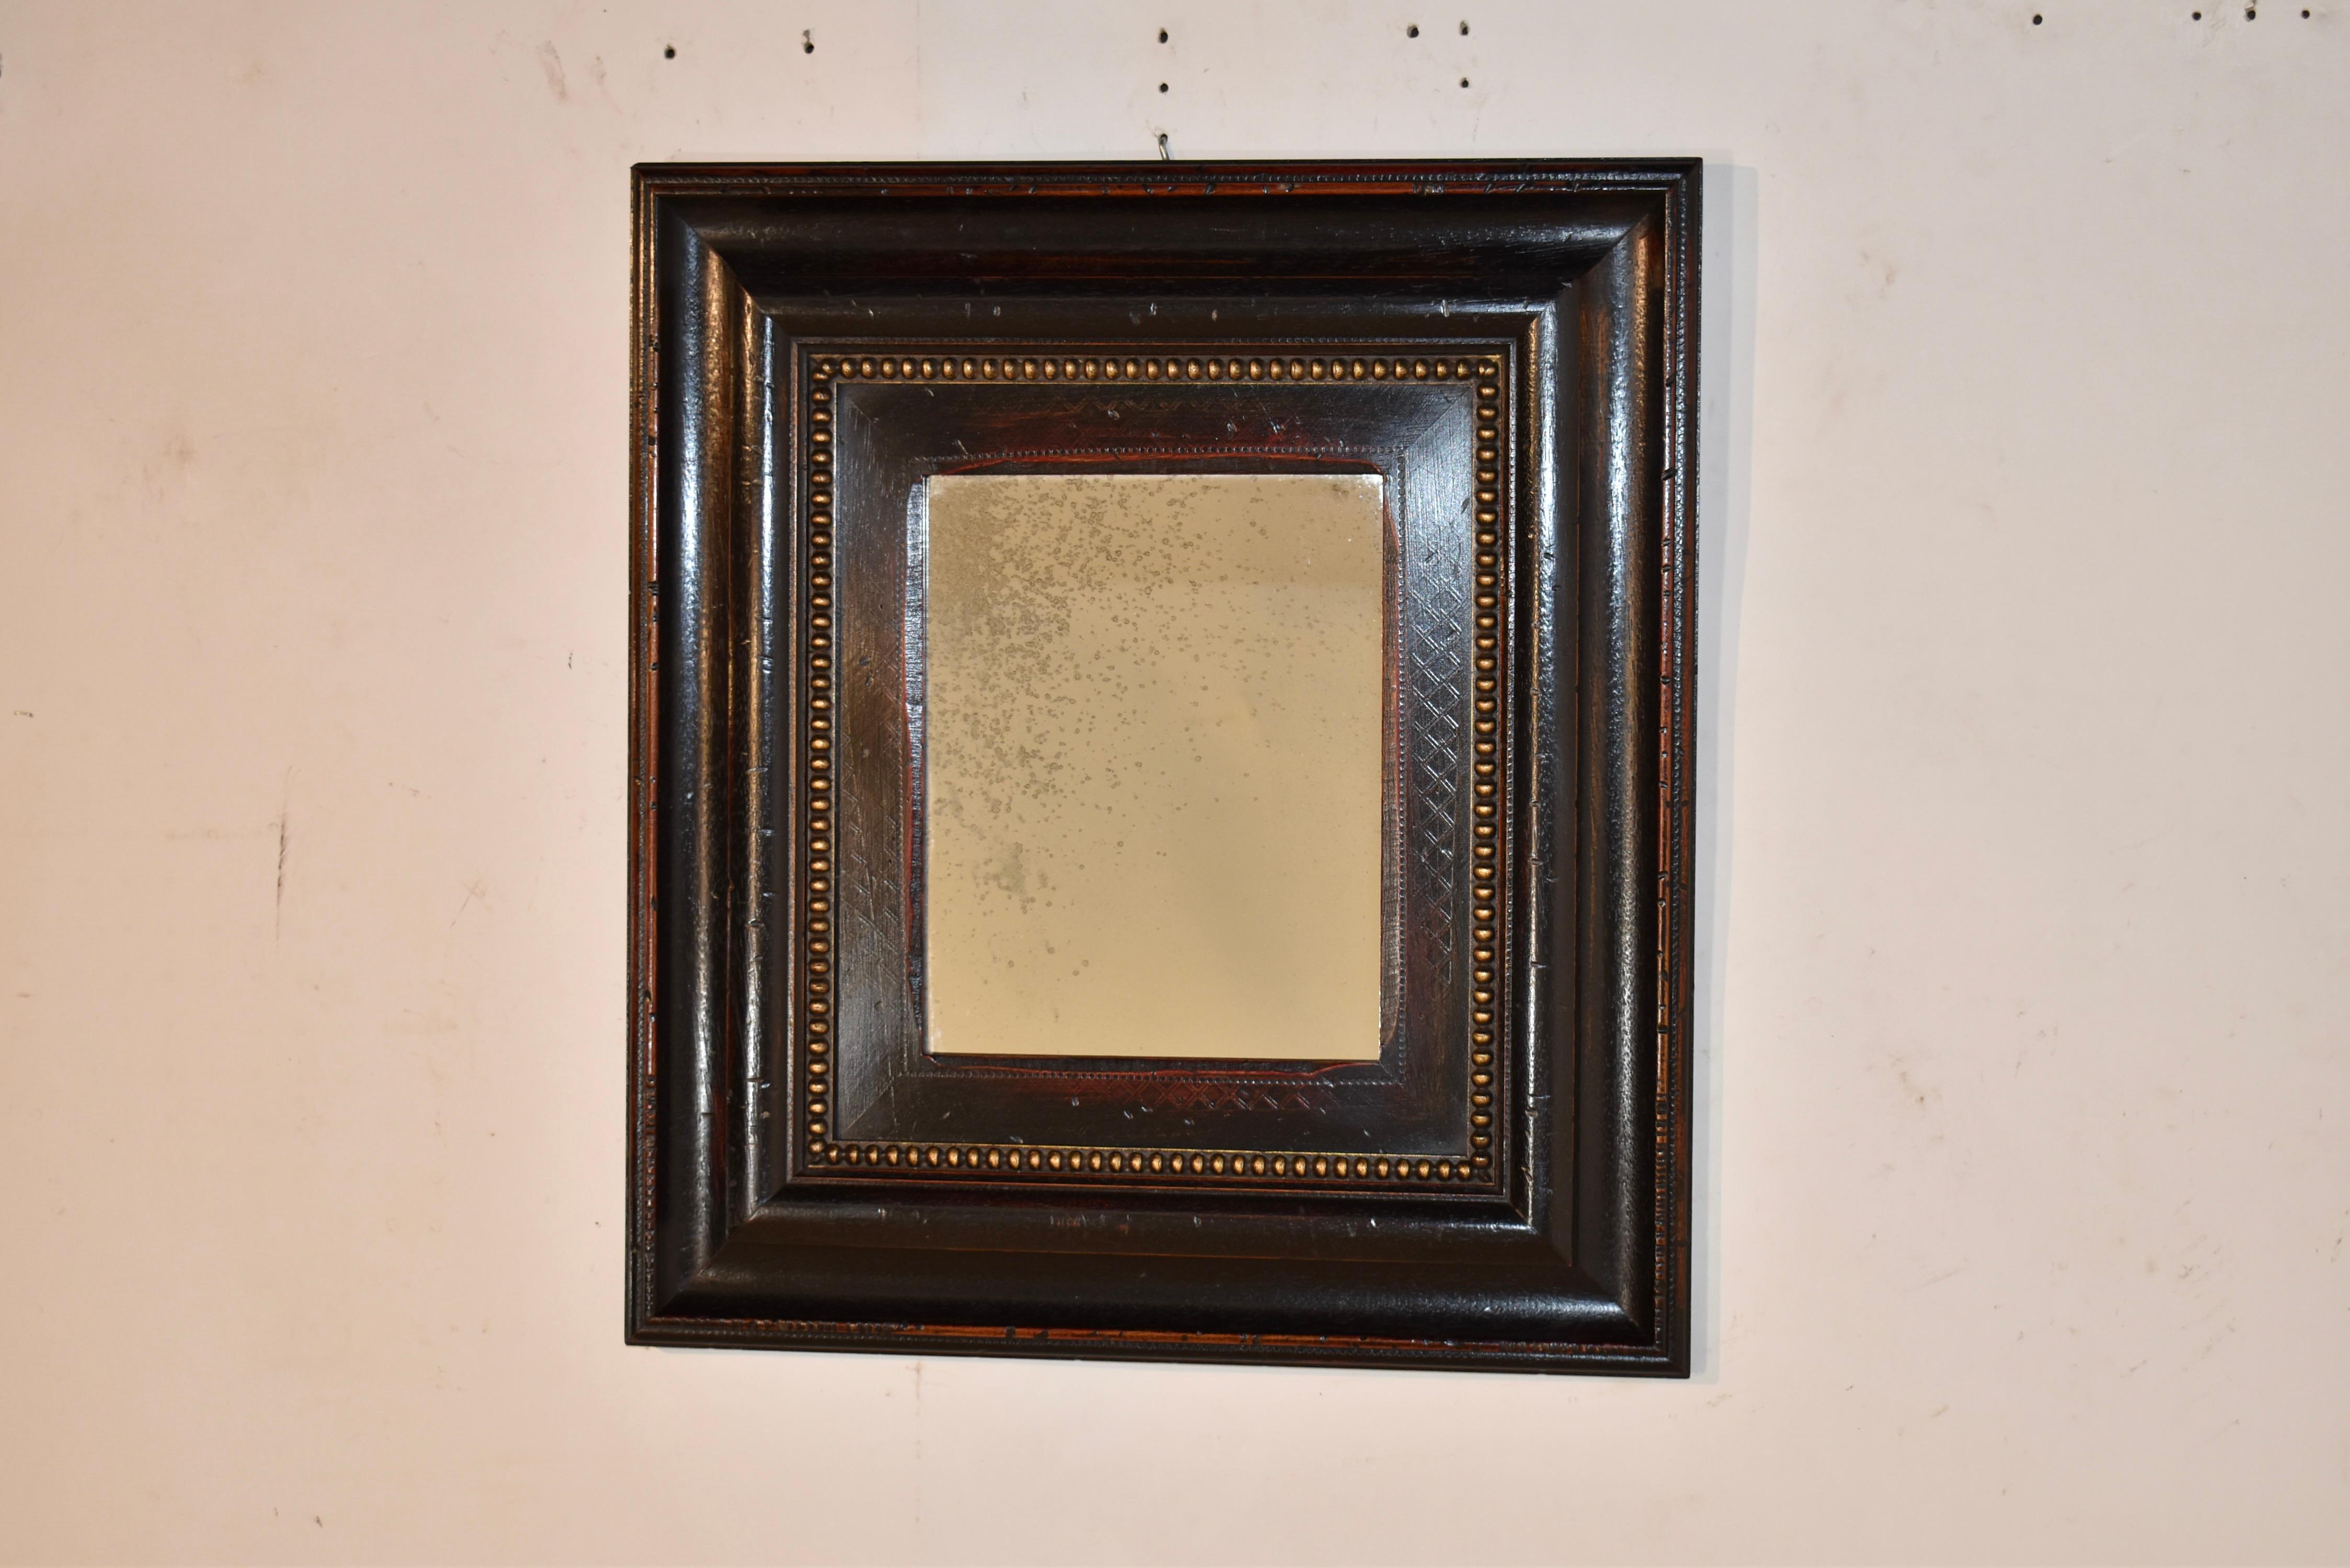 Vintage wall mirror with a wide, handmade frame in  rubbed black finish with highlights in gold beading.  The frame surrounds a mercury glass mirror.  The quality of this frame is wonderful and will add design interest to any room in a house or